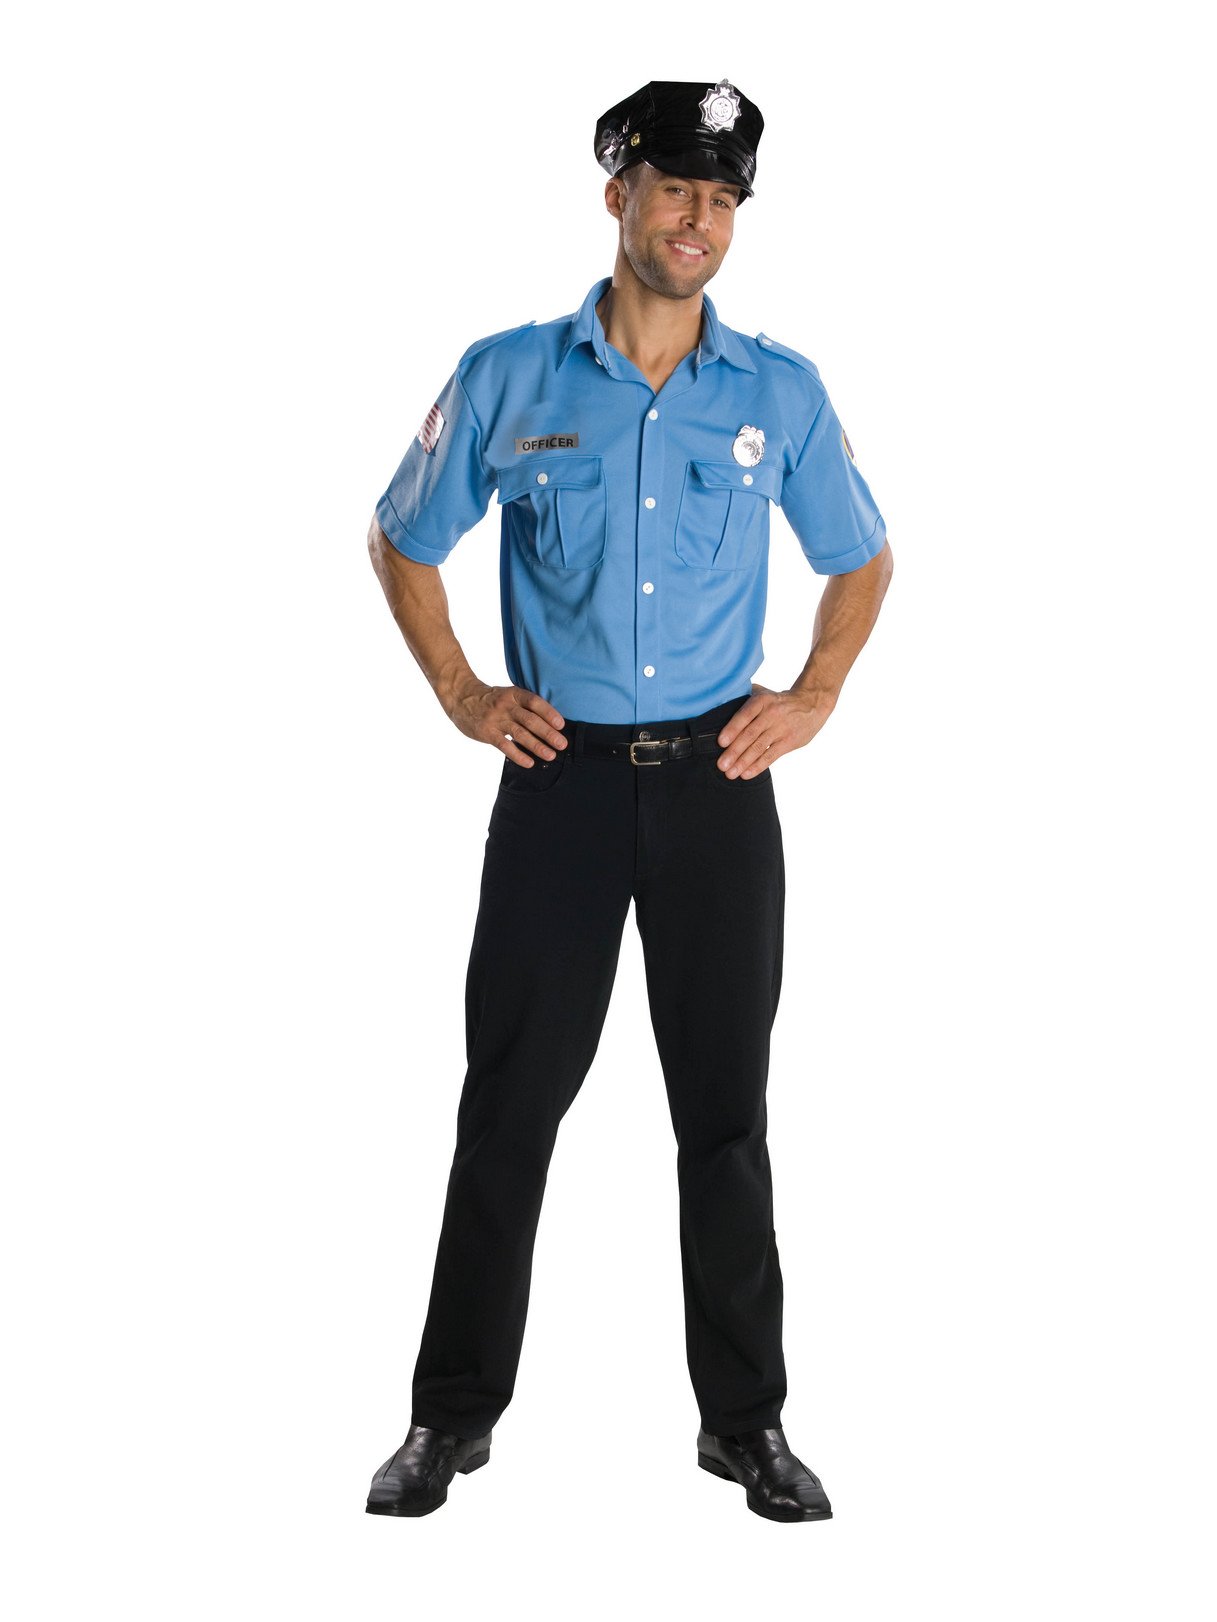 Adult Police Officer Costume - image 2 of 3